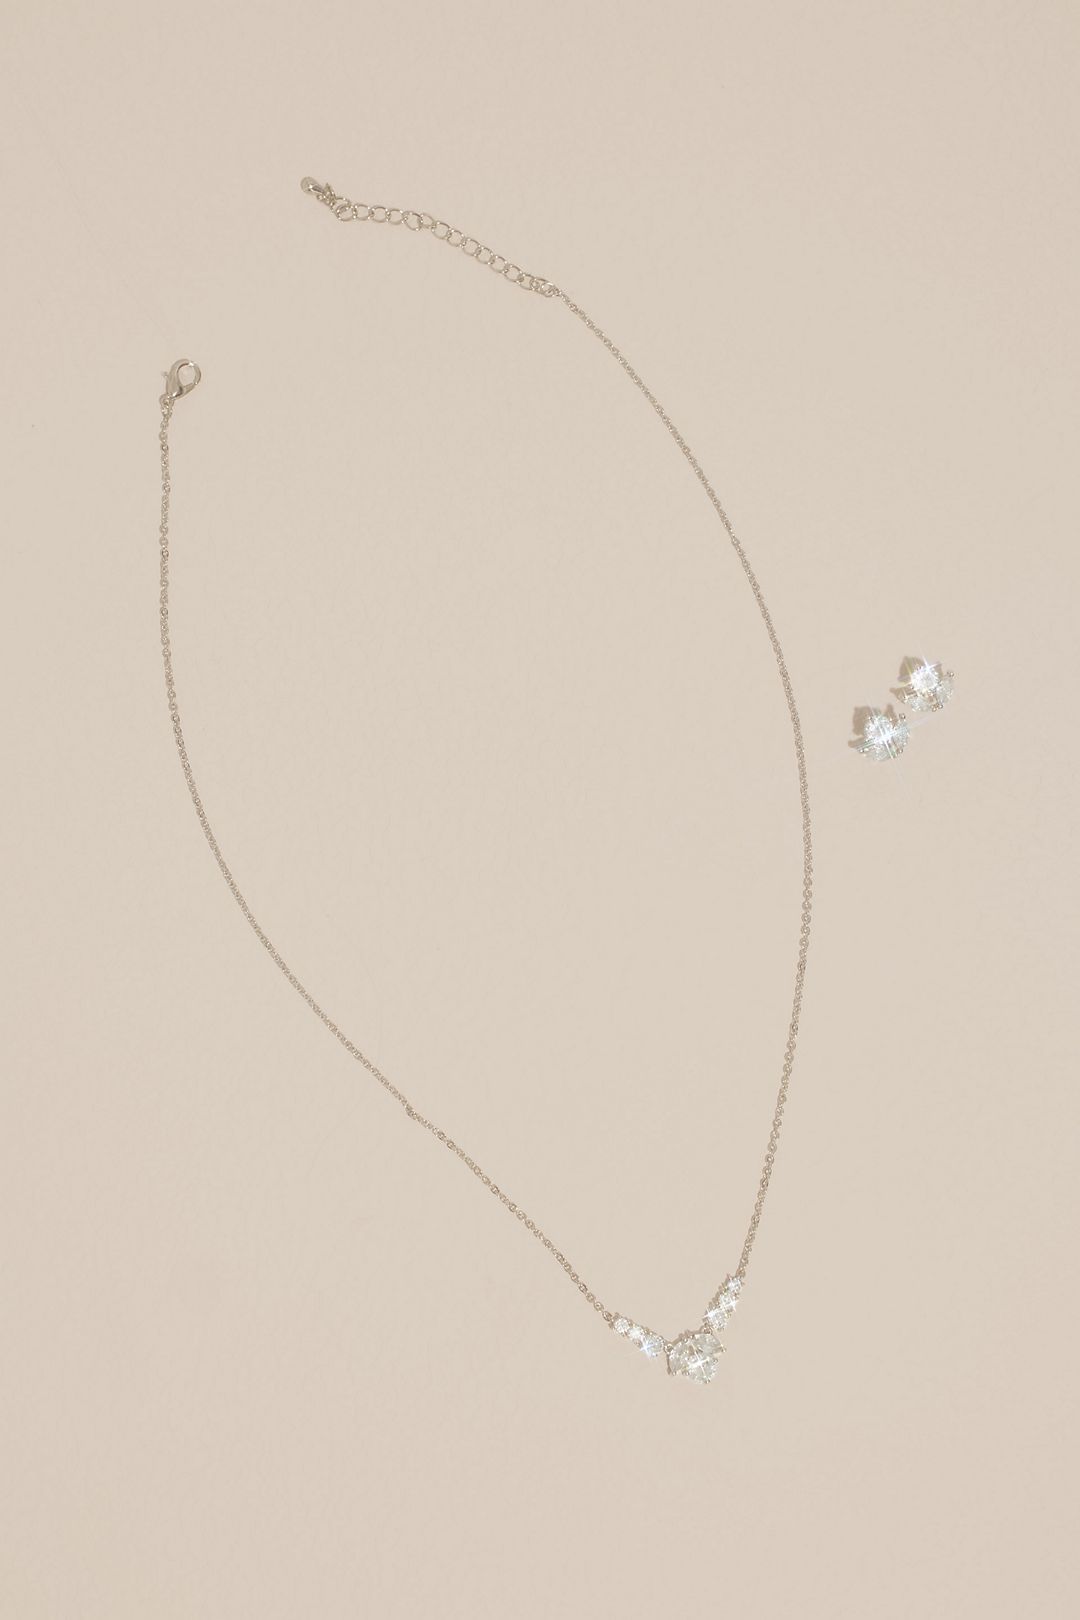 Cubic Zirconia Rosebud Necklace and Earring Set Image 3